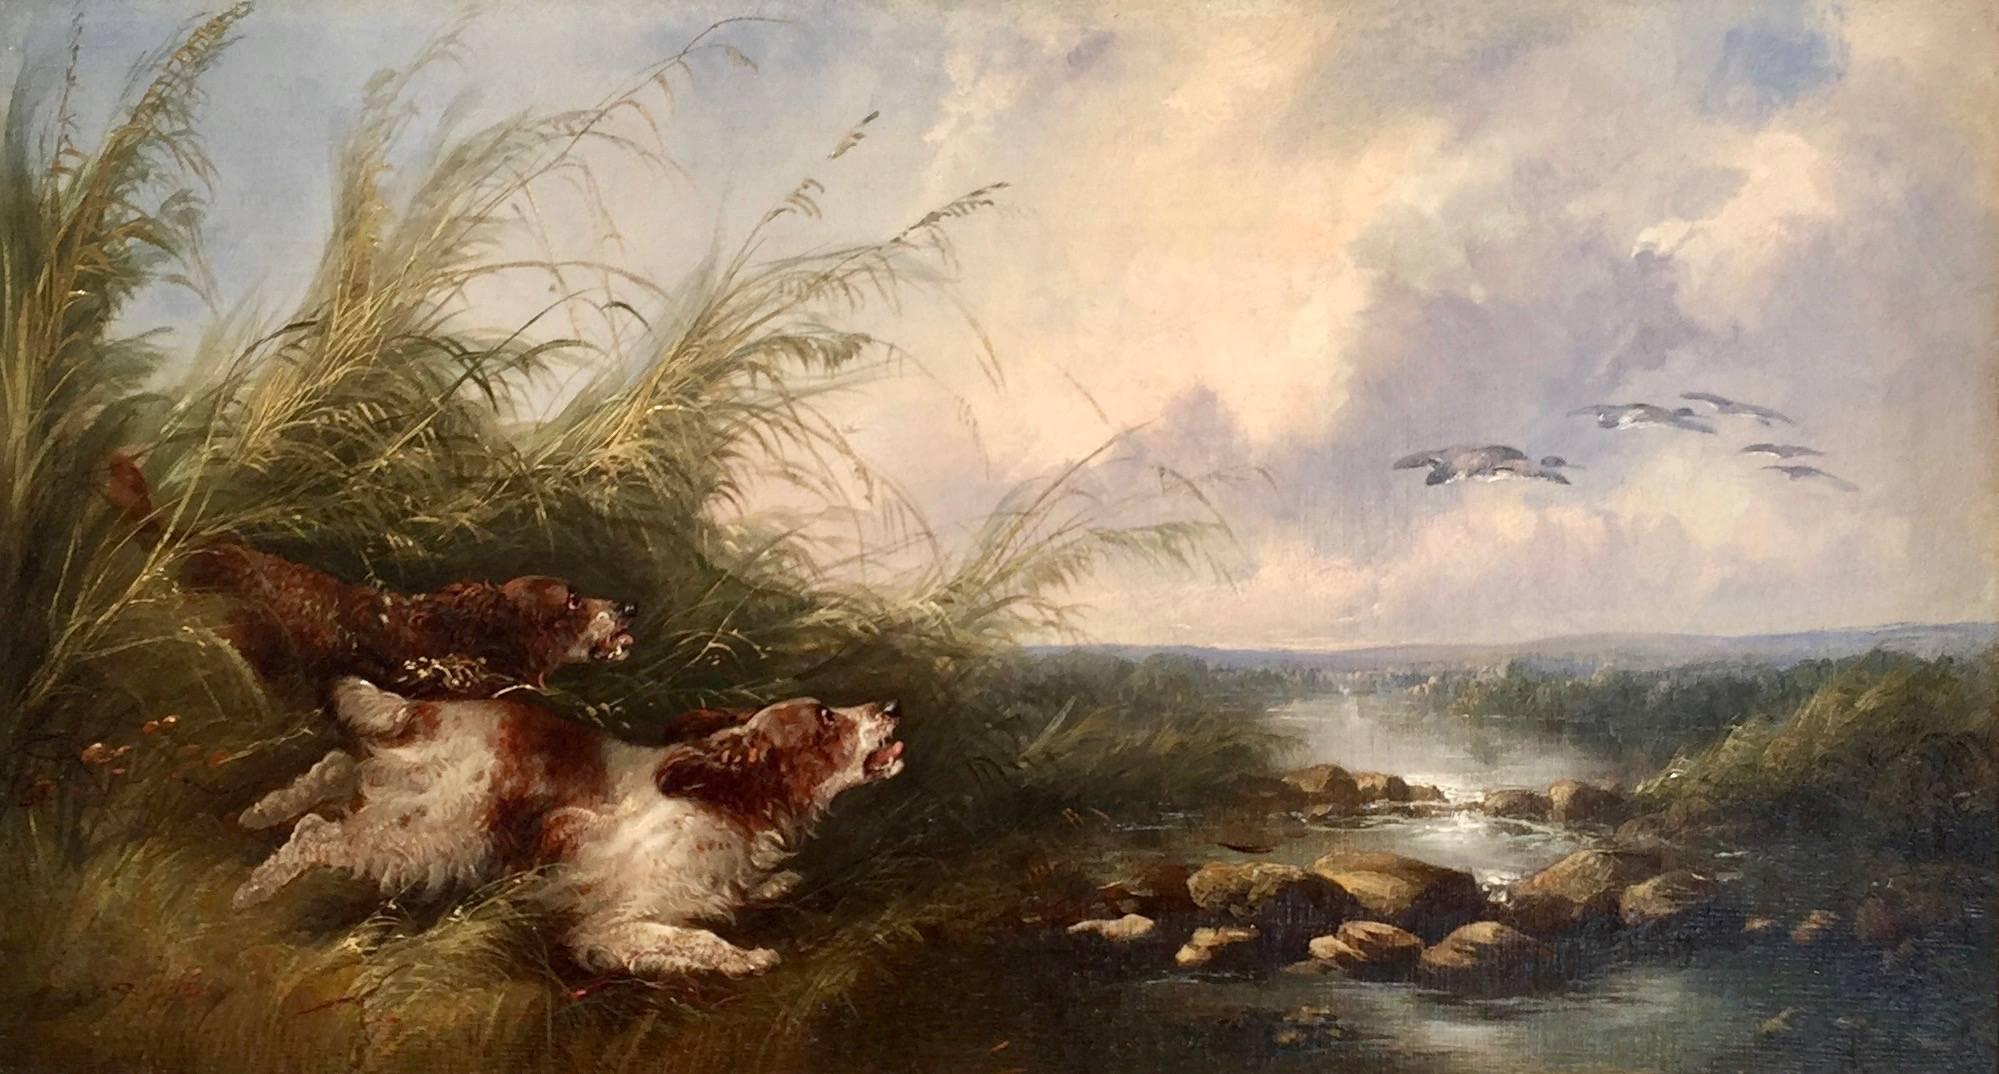 English Spaniel dogs chasing ducks  by a river - Painting by George Armfield